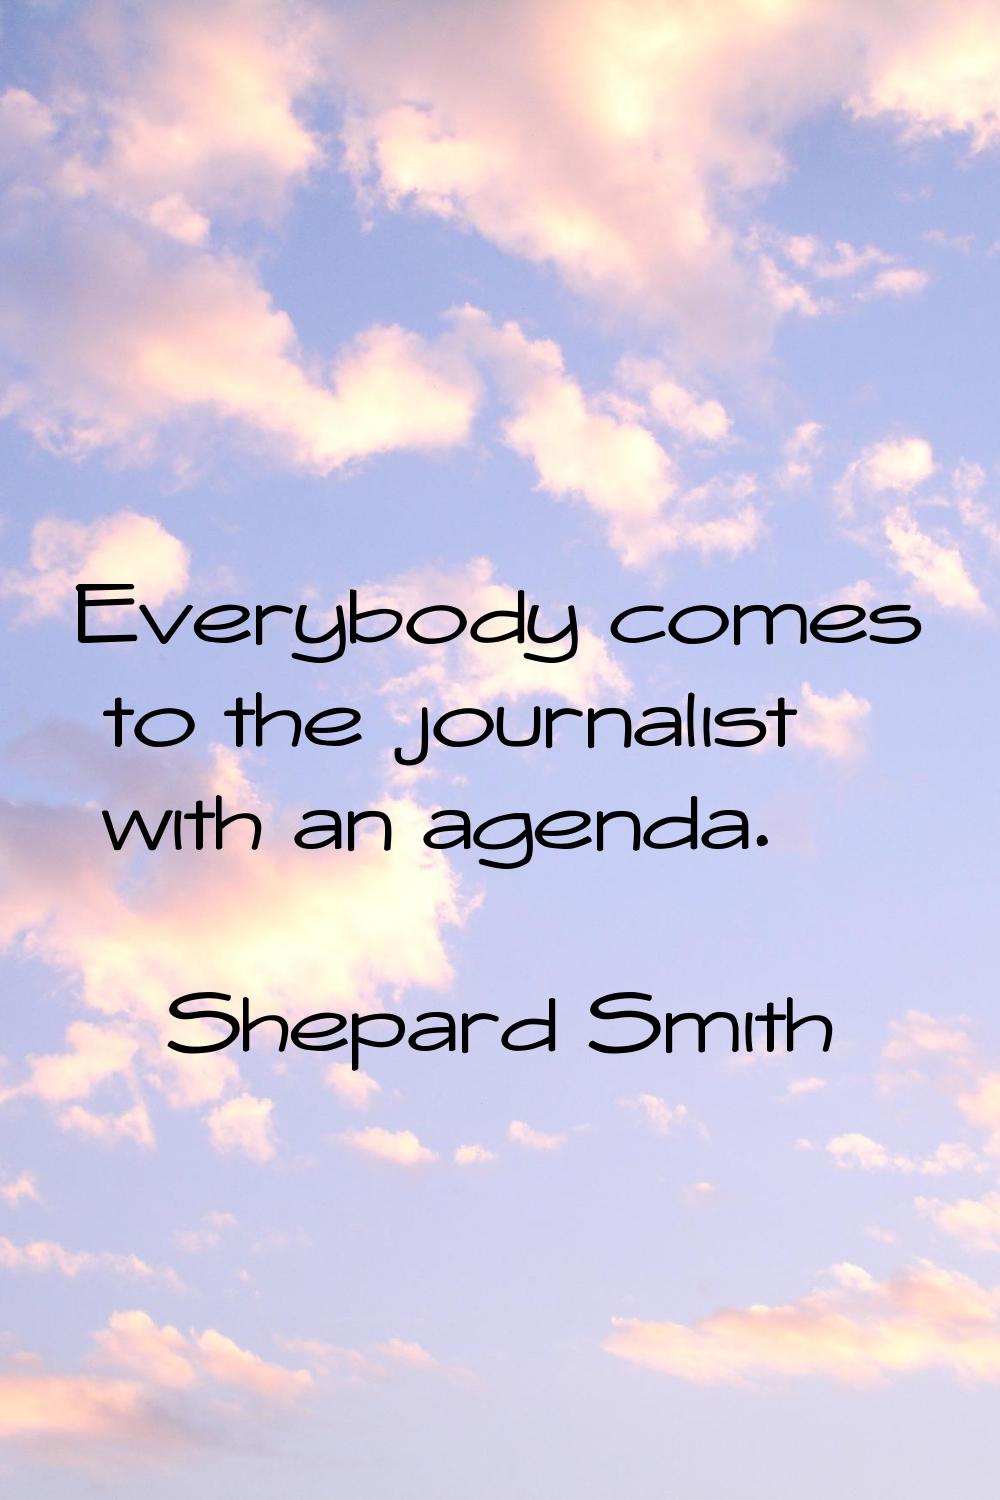 Everybody comes to the journalist with an agenda.